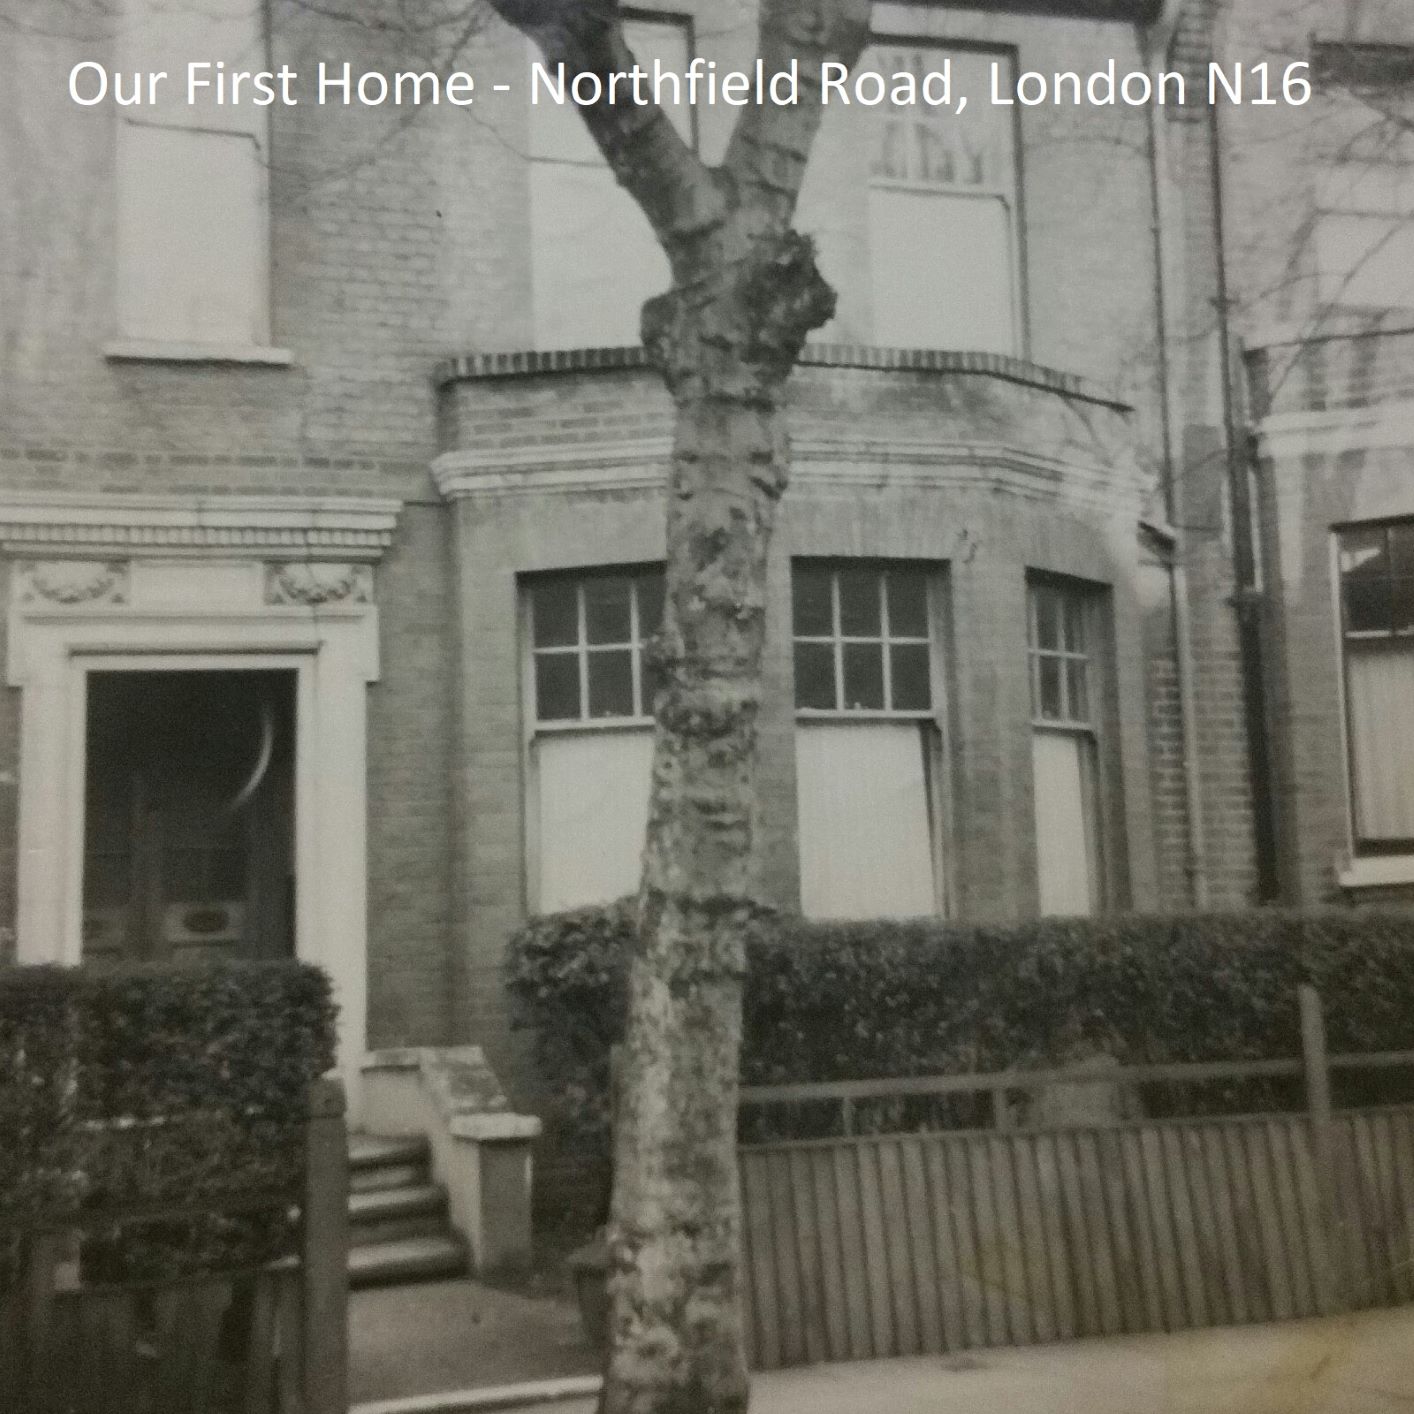 55 Northfield Road - Our founding location in 1953